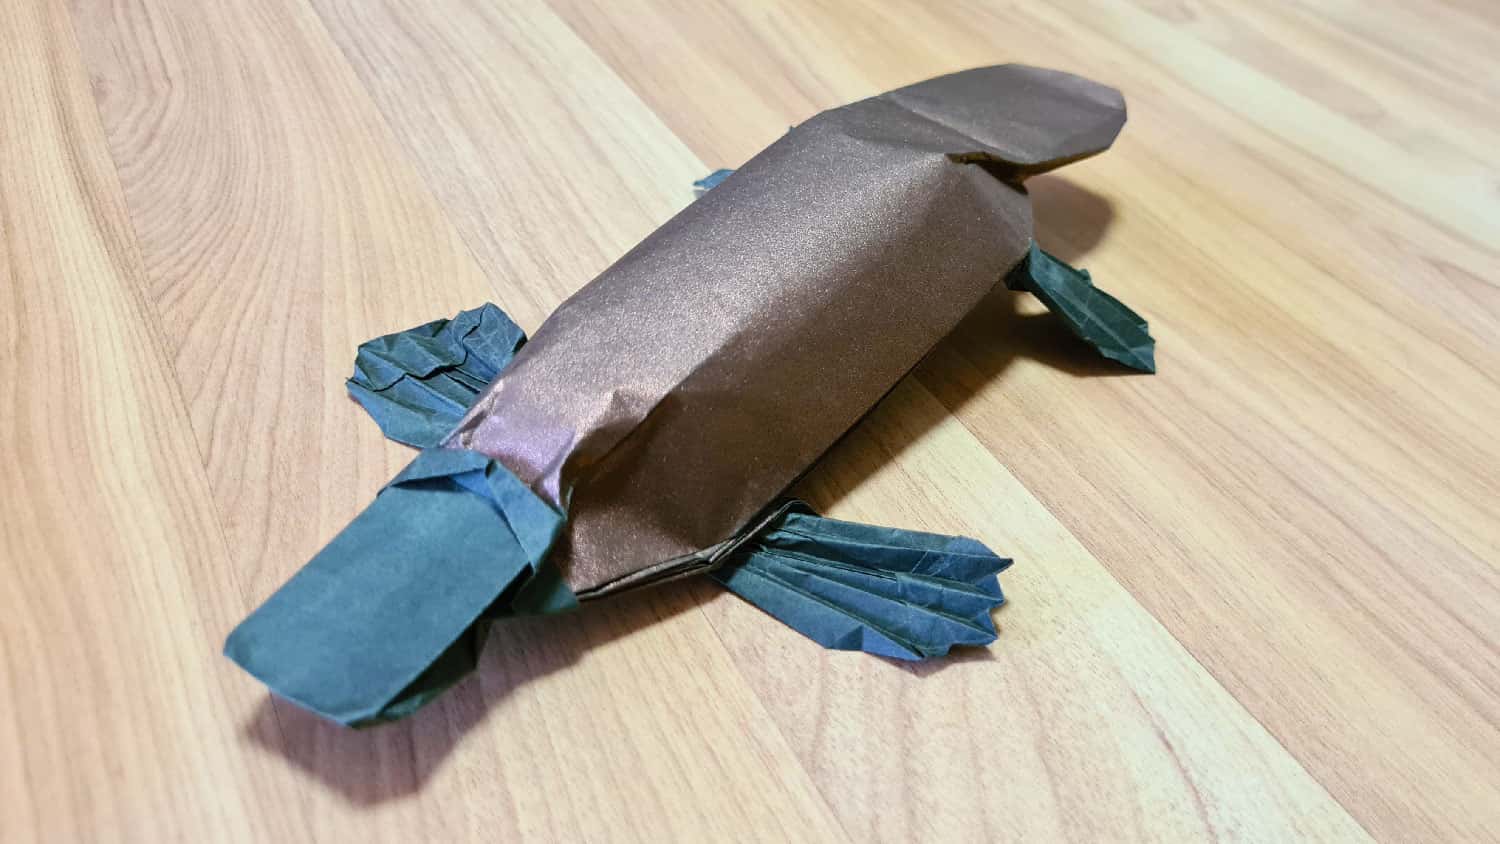 A folded origami platypus model, viewed from the front